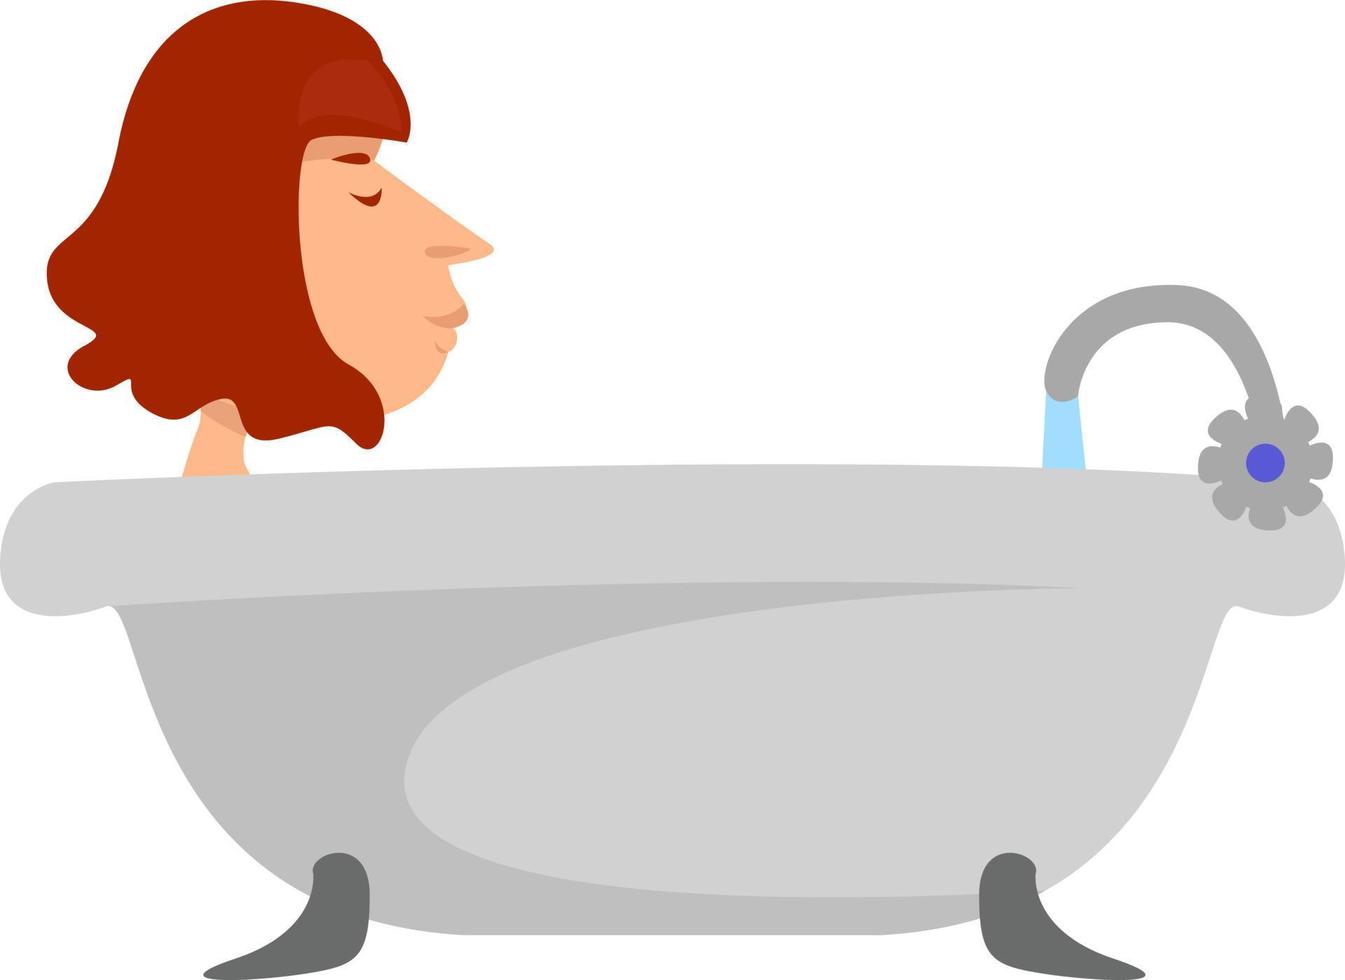 Relaxing in bathtub, illustration, vector on white background